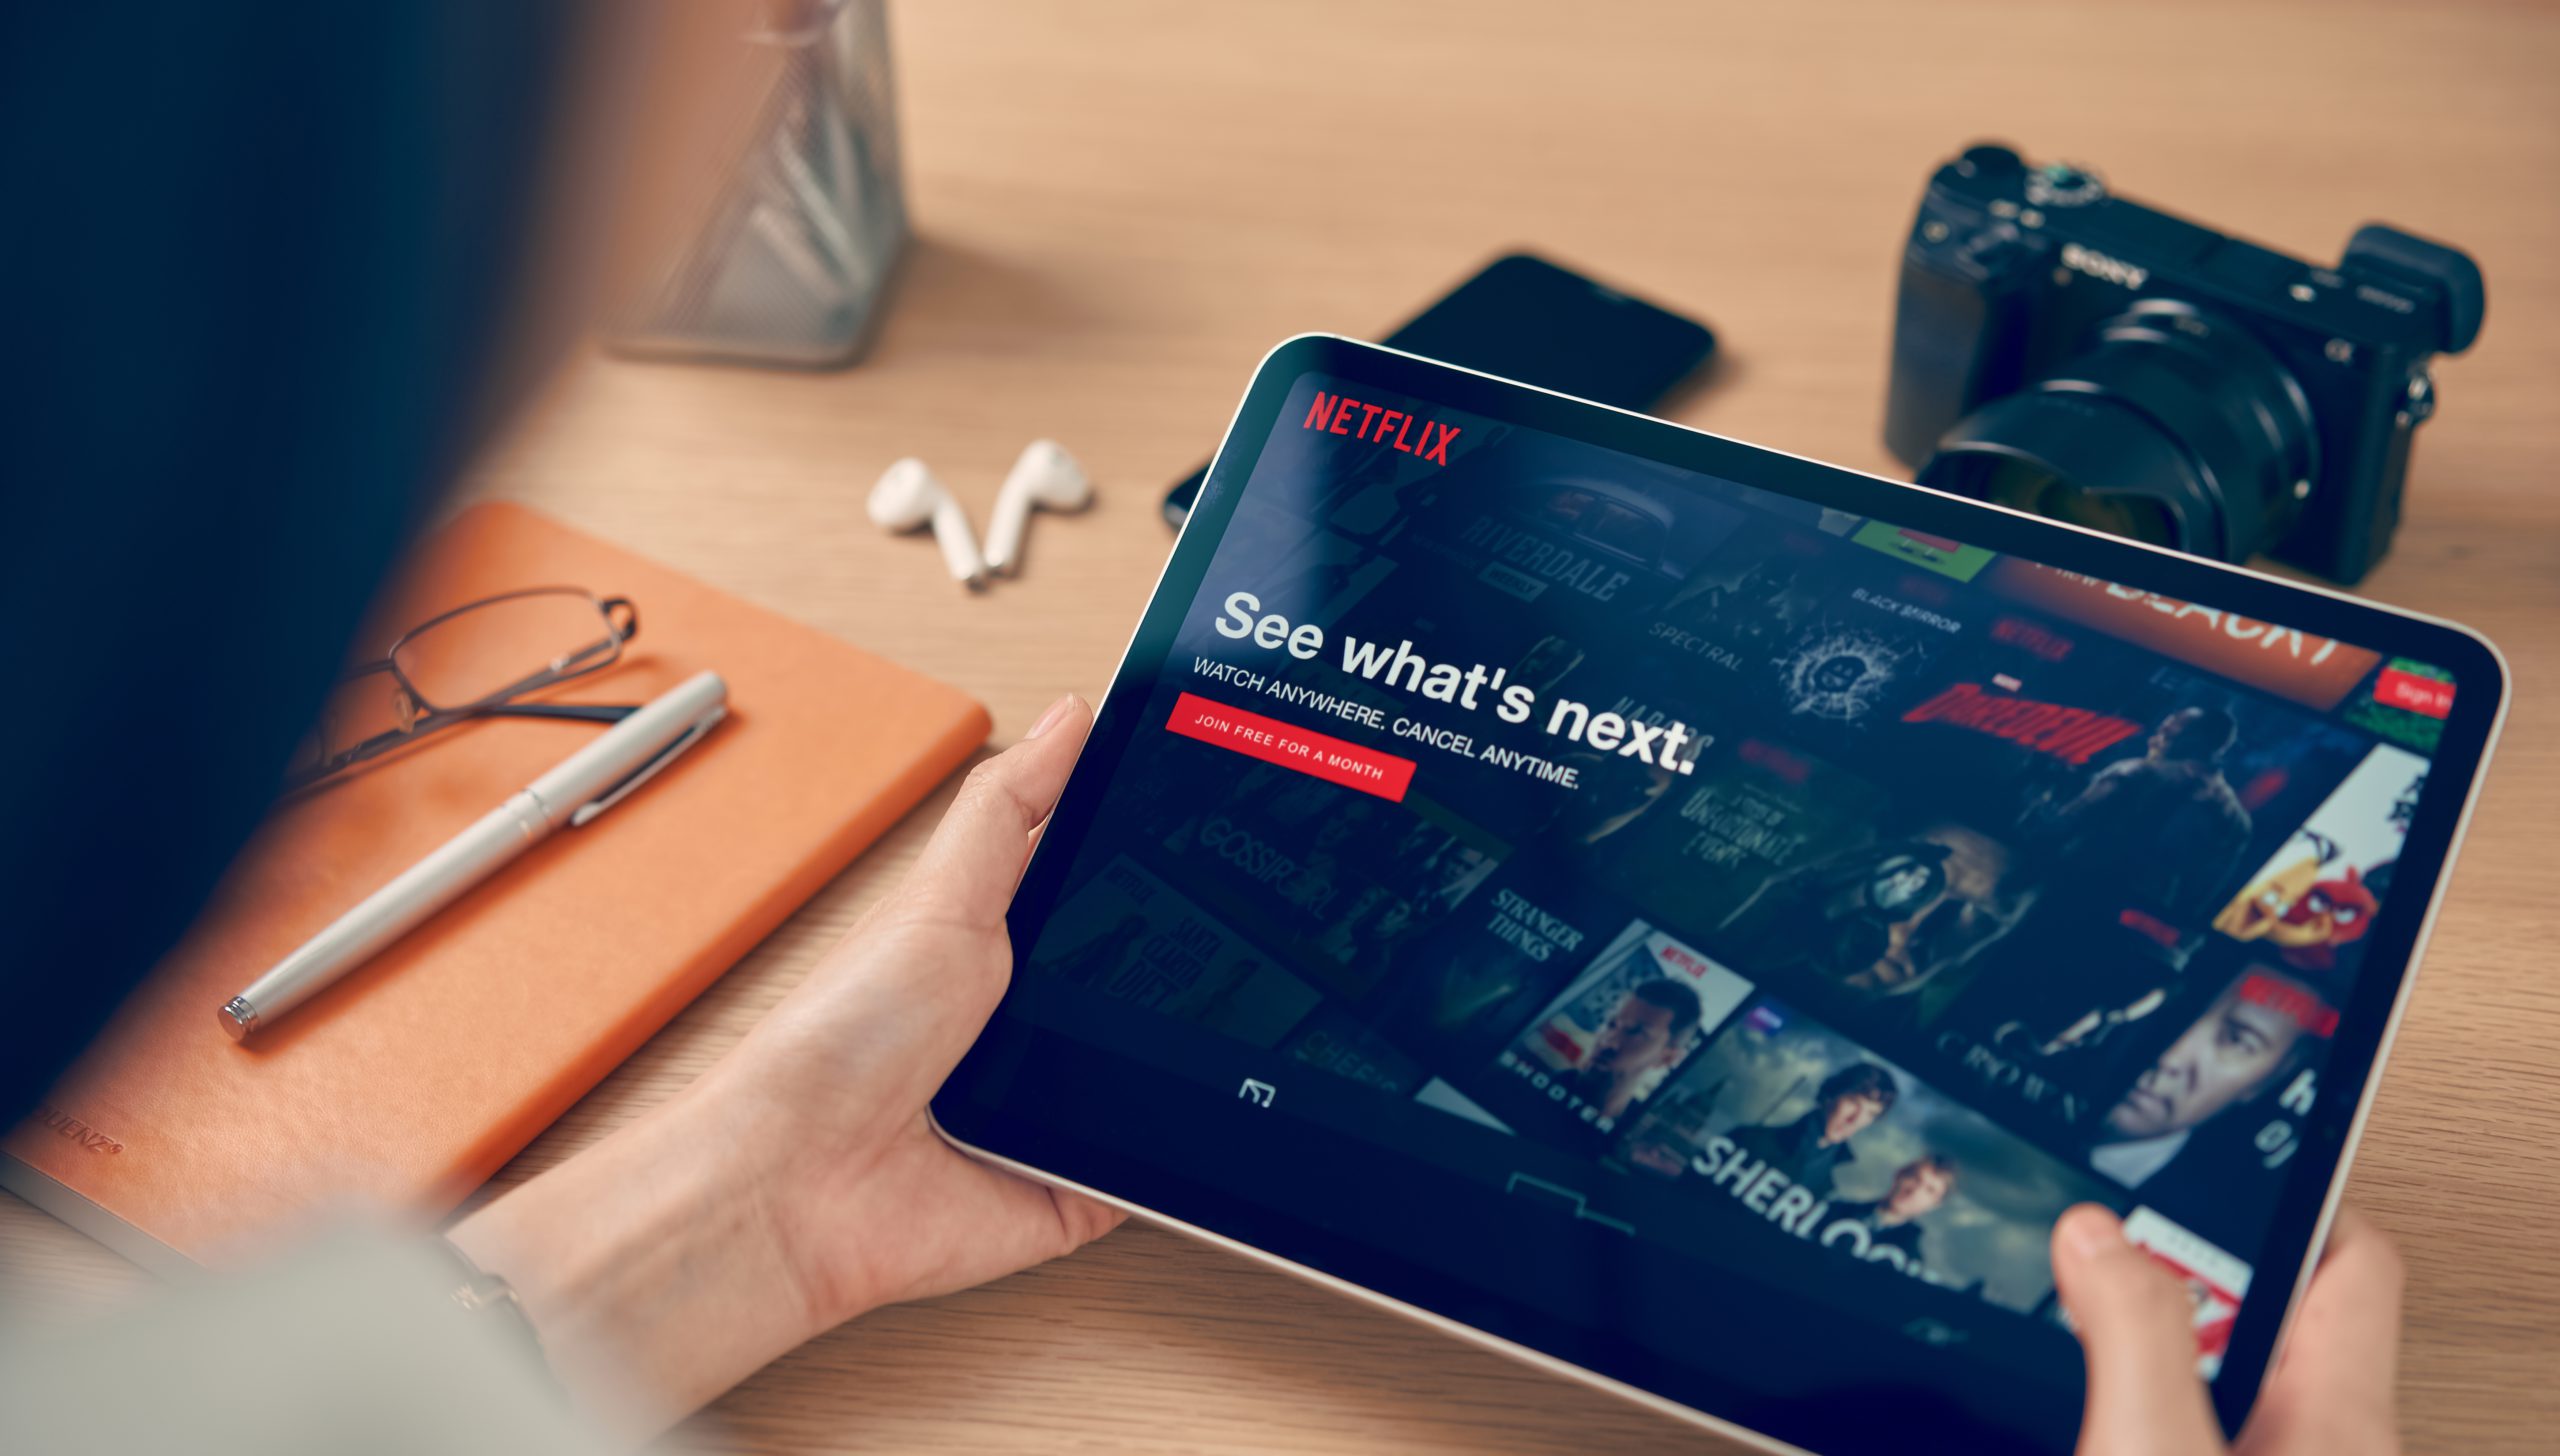 women use Netflix app on iPad Pro screen. Netflix is an international leading subscription service for watching TV episodes and movies